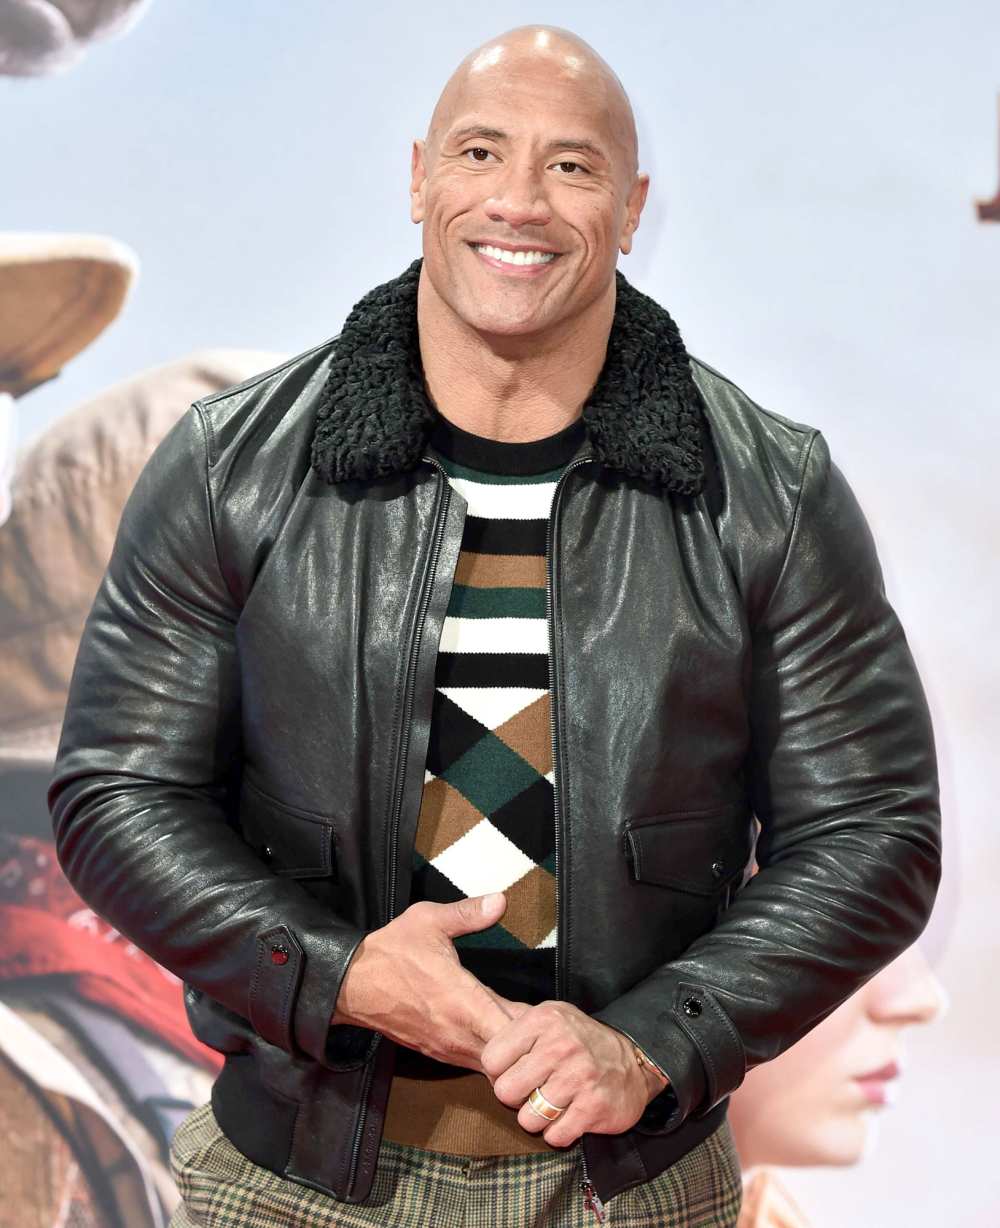 Fans Are Losing It Over Dwayne The Rock Johnson Big Trouser Energy